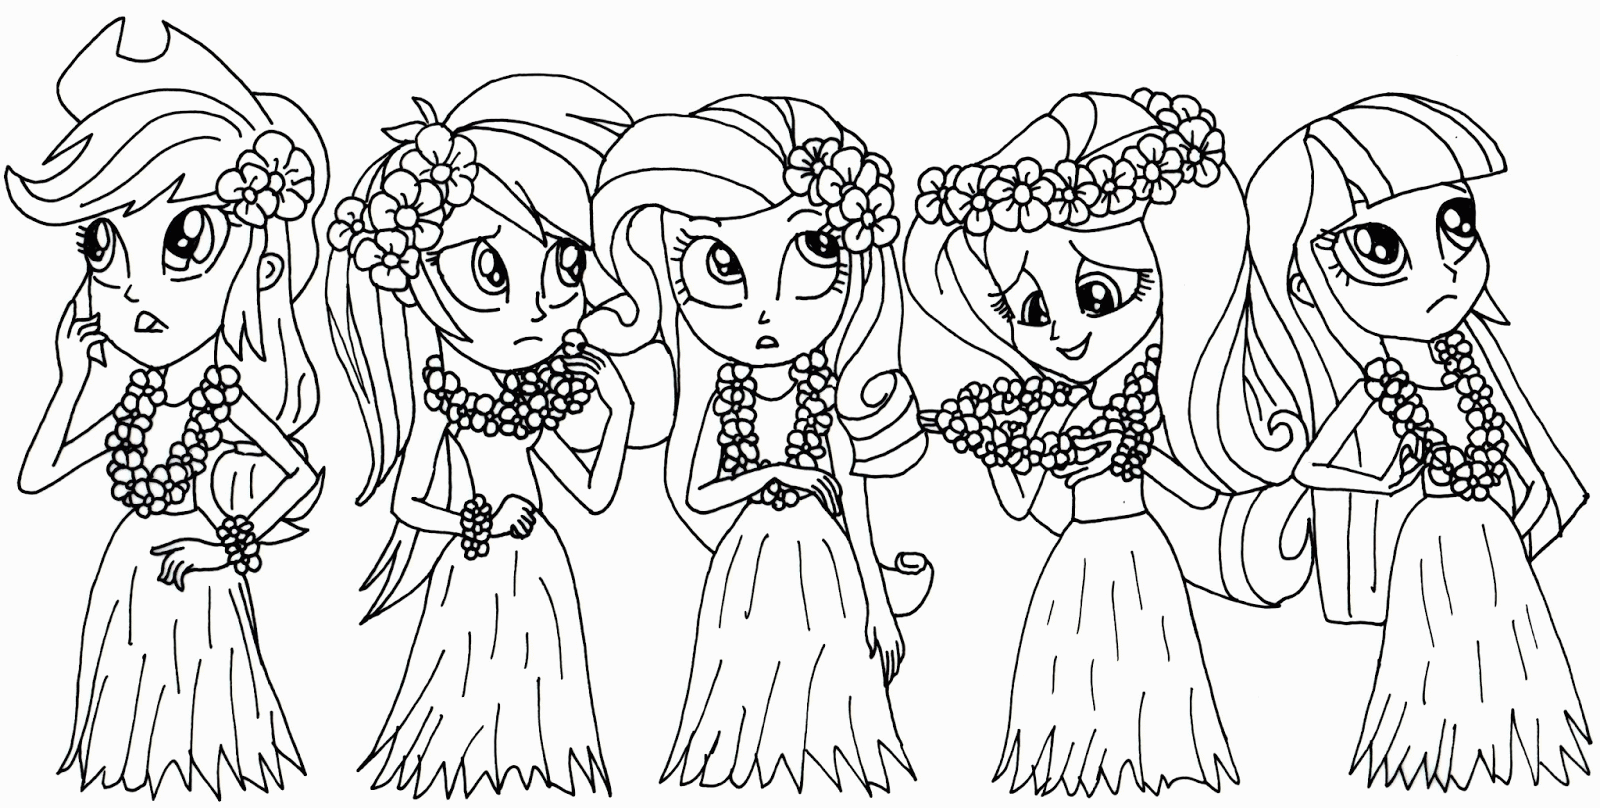 free-my-little-pony-coloring-pages-rainbow-dash-equestria-girls